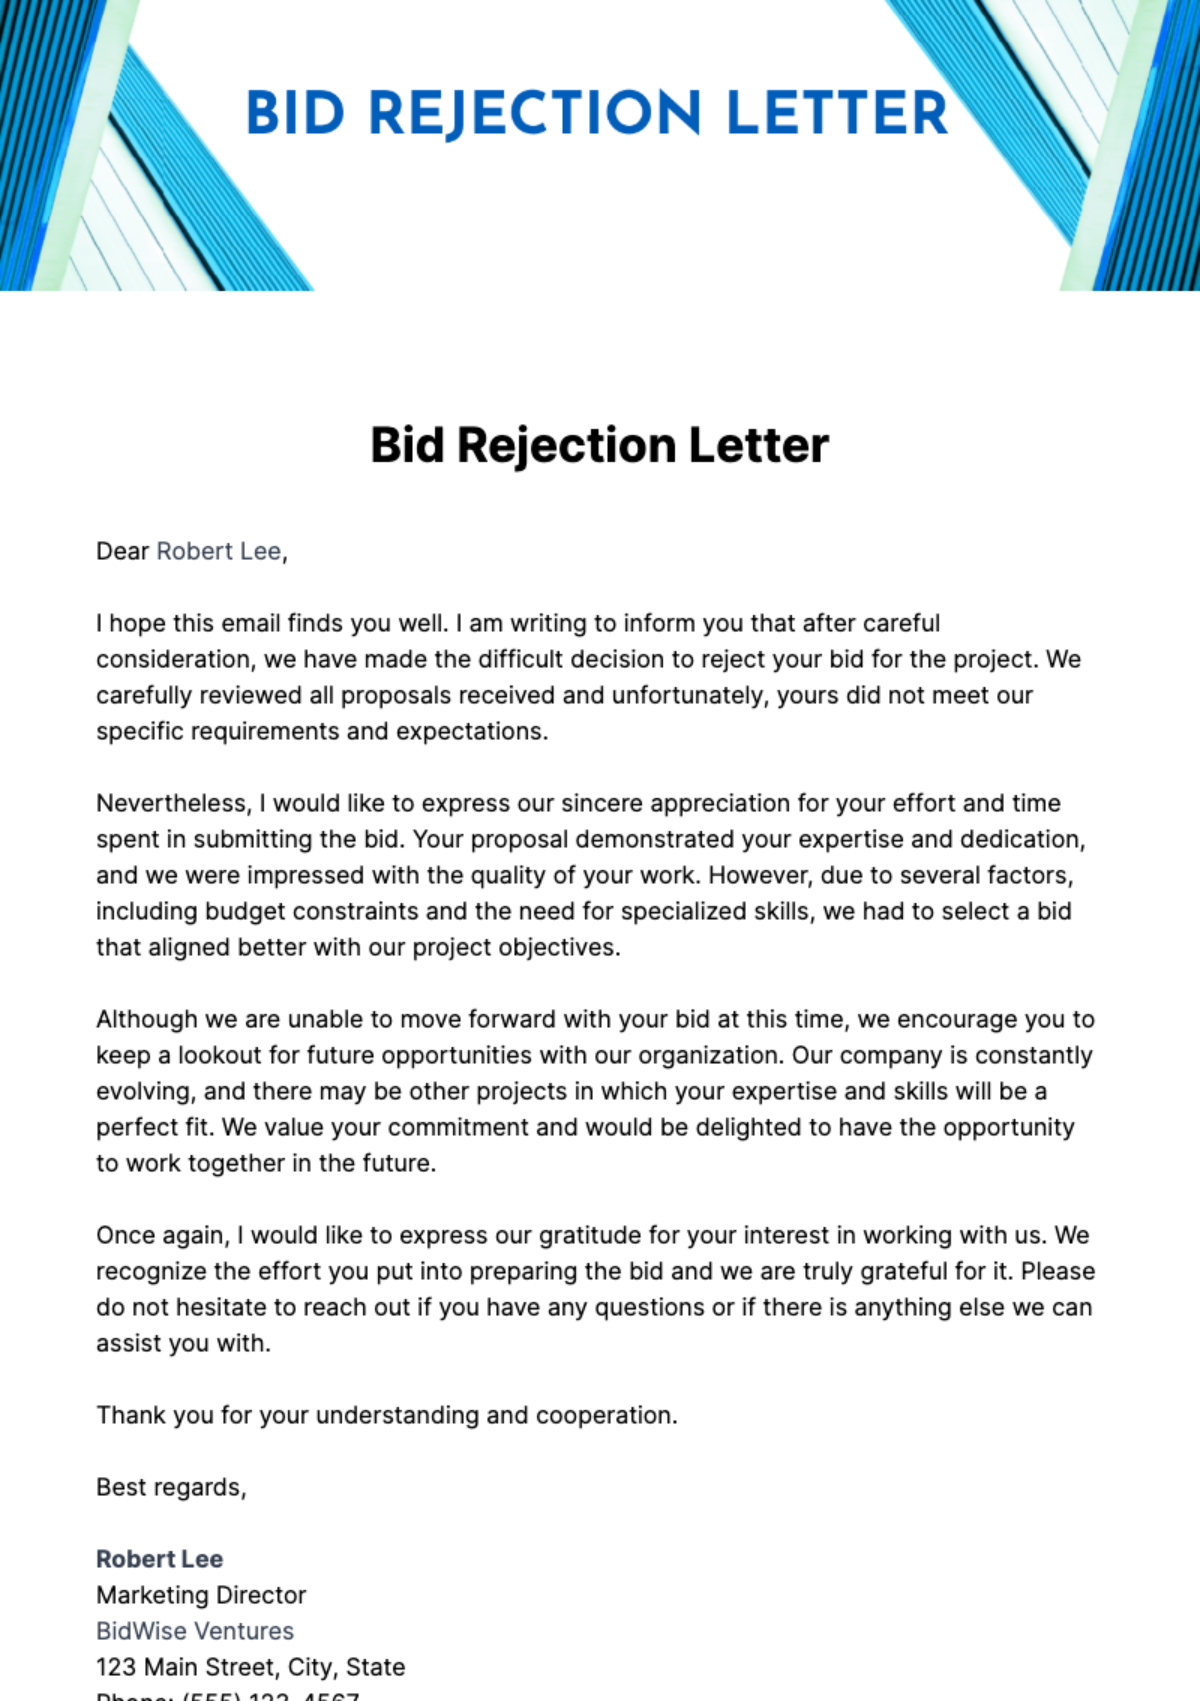 Free Bid Rejection Letter Template